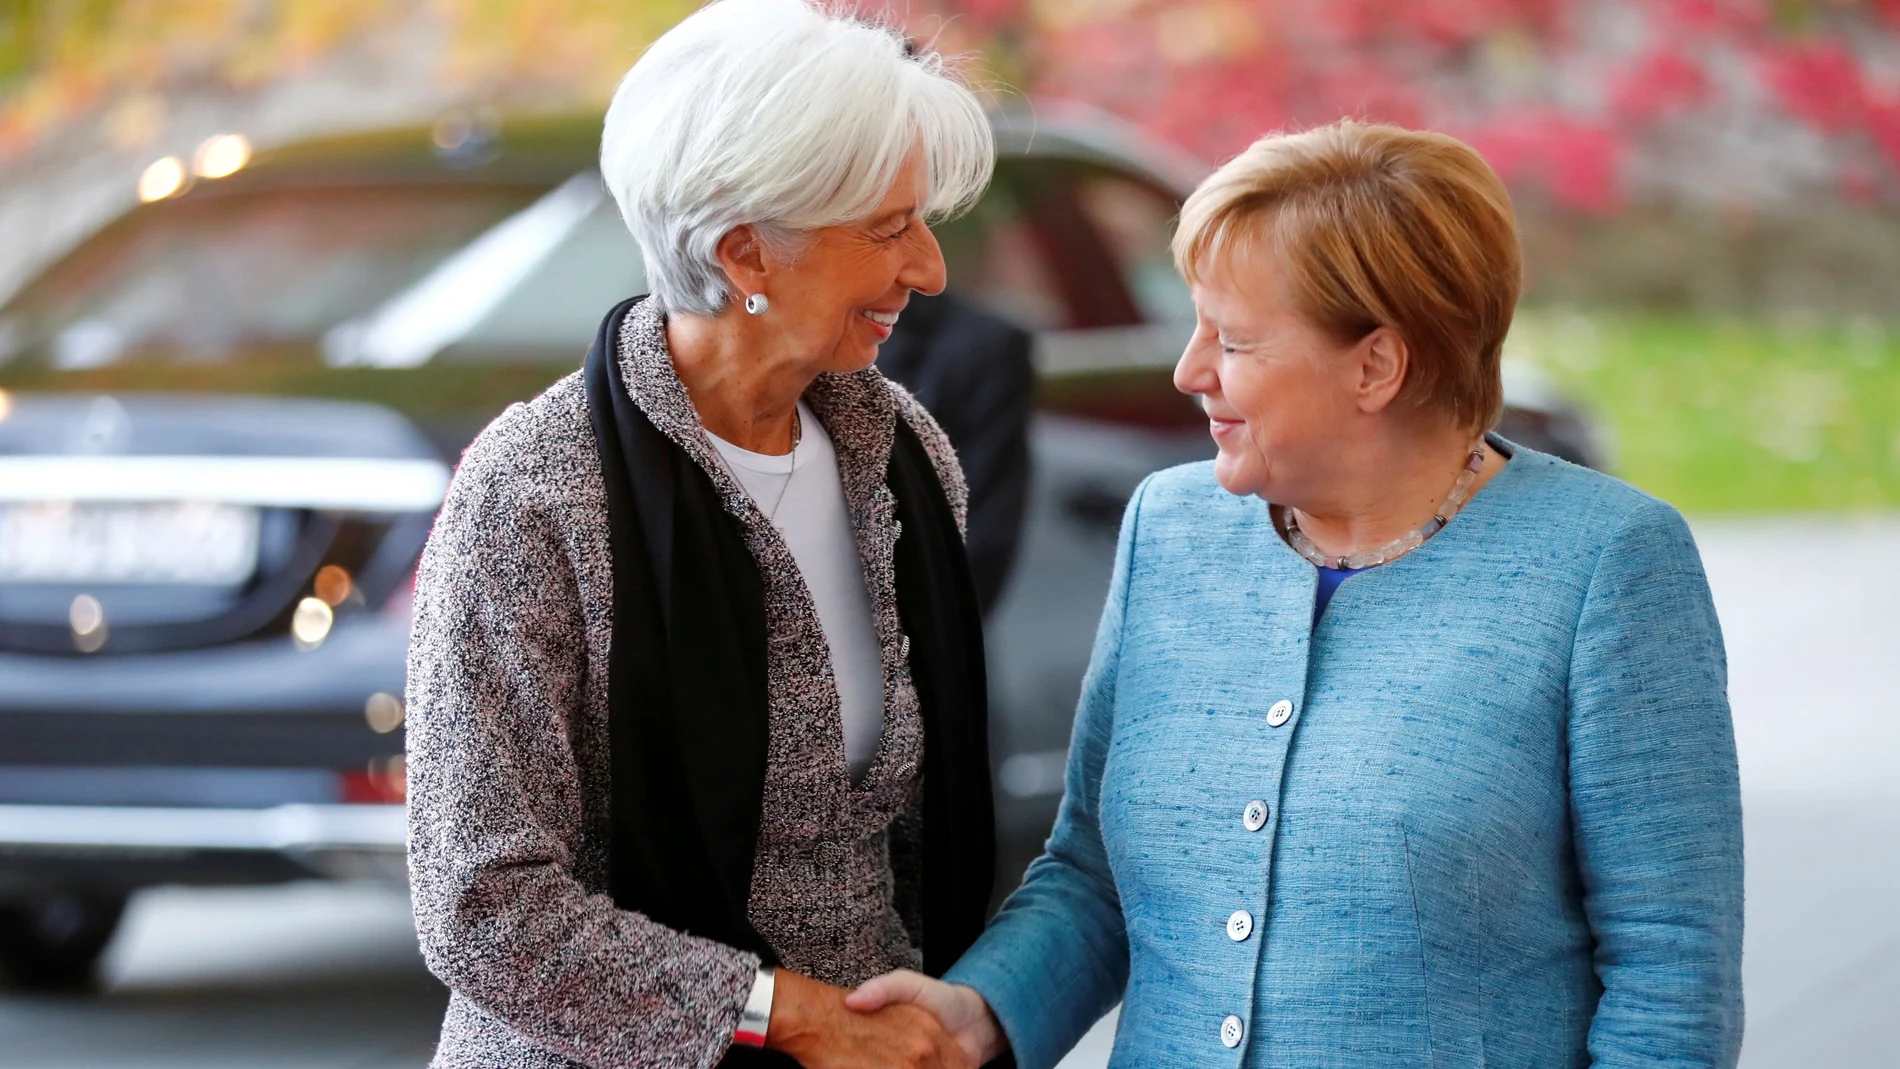 FILE PHOTO: German Chancellor Merkel welcomes International Monetary Fund Managing Director Lagarde ahead of the 'G20 Compact with Africa' summit at the Chancellery in Berlin